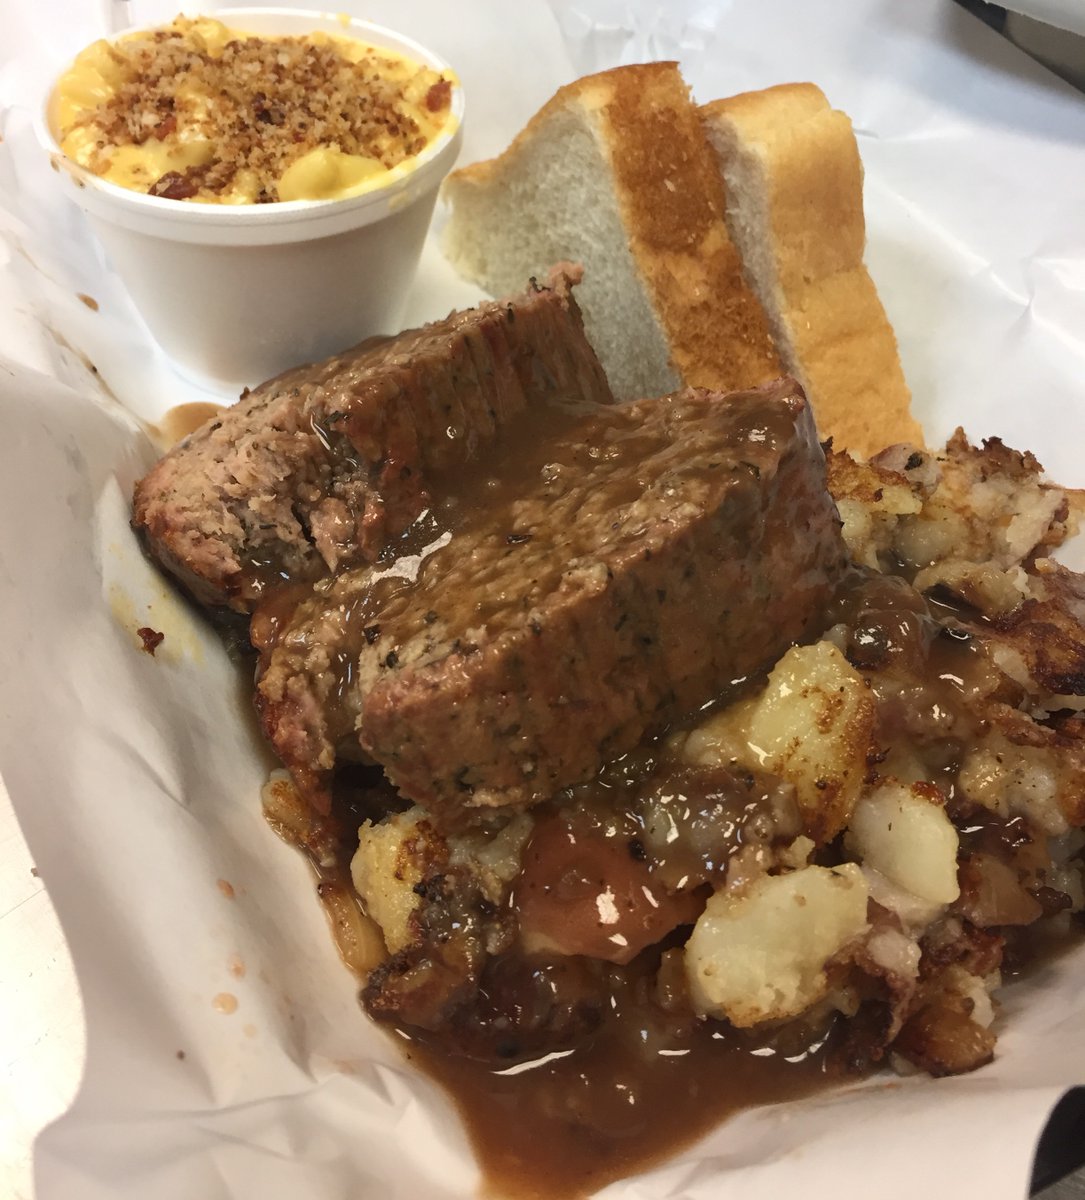 You focus on the holiday prep, we'll make the meatloaf! 🐮🔥😋  Doors open at 11 am! 

#meatloafsunday #sundaydinner #daliessmokehouse #smokehouse #barbecue #bbq #food #pork #smokedmeats #sandwiches #stleats #eatlocal #valleypark #kirkwood #stlouis